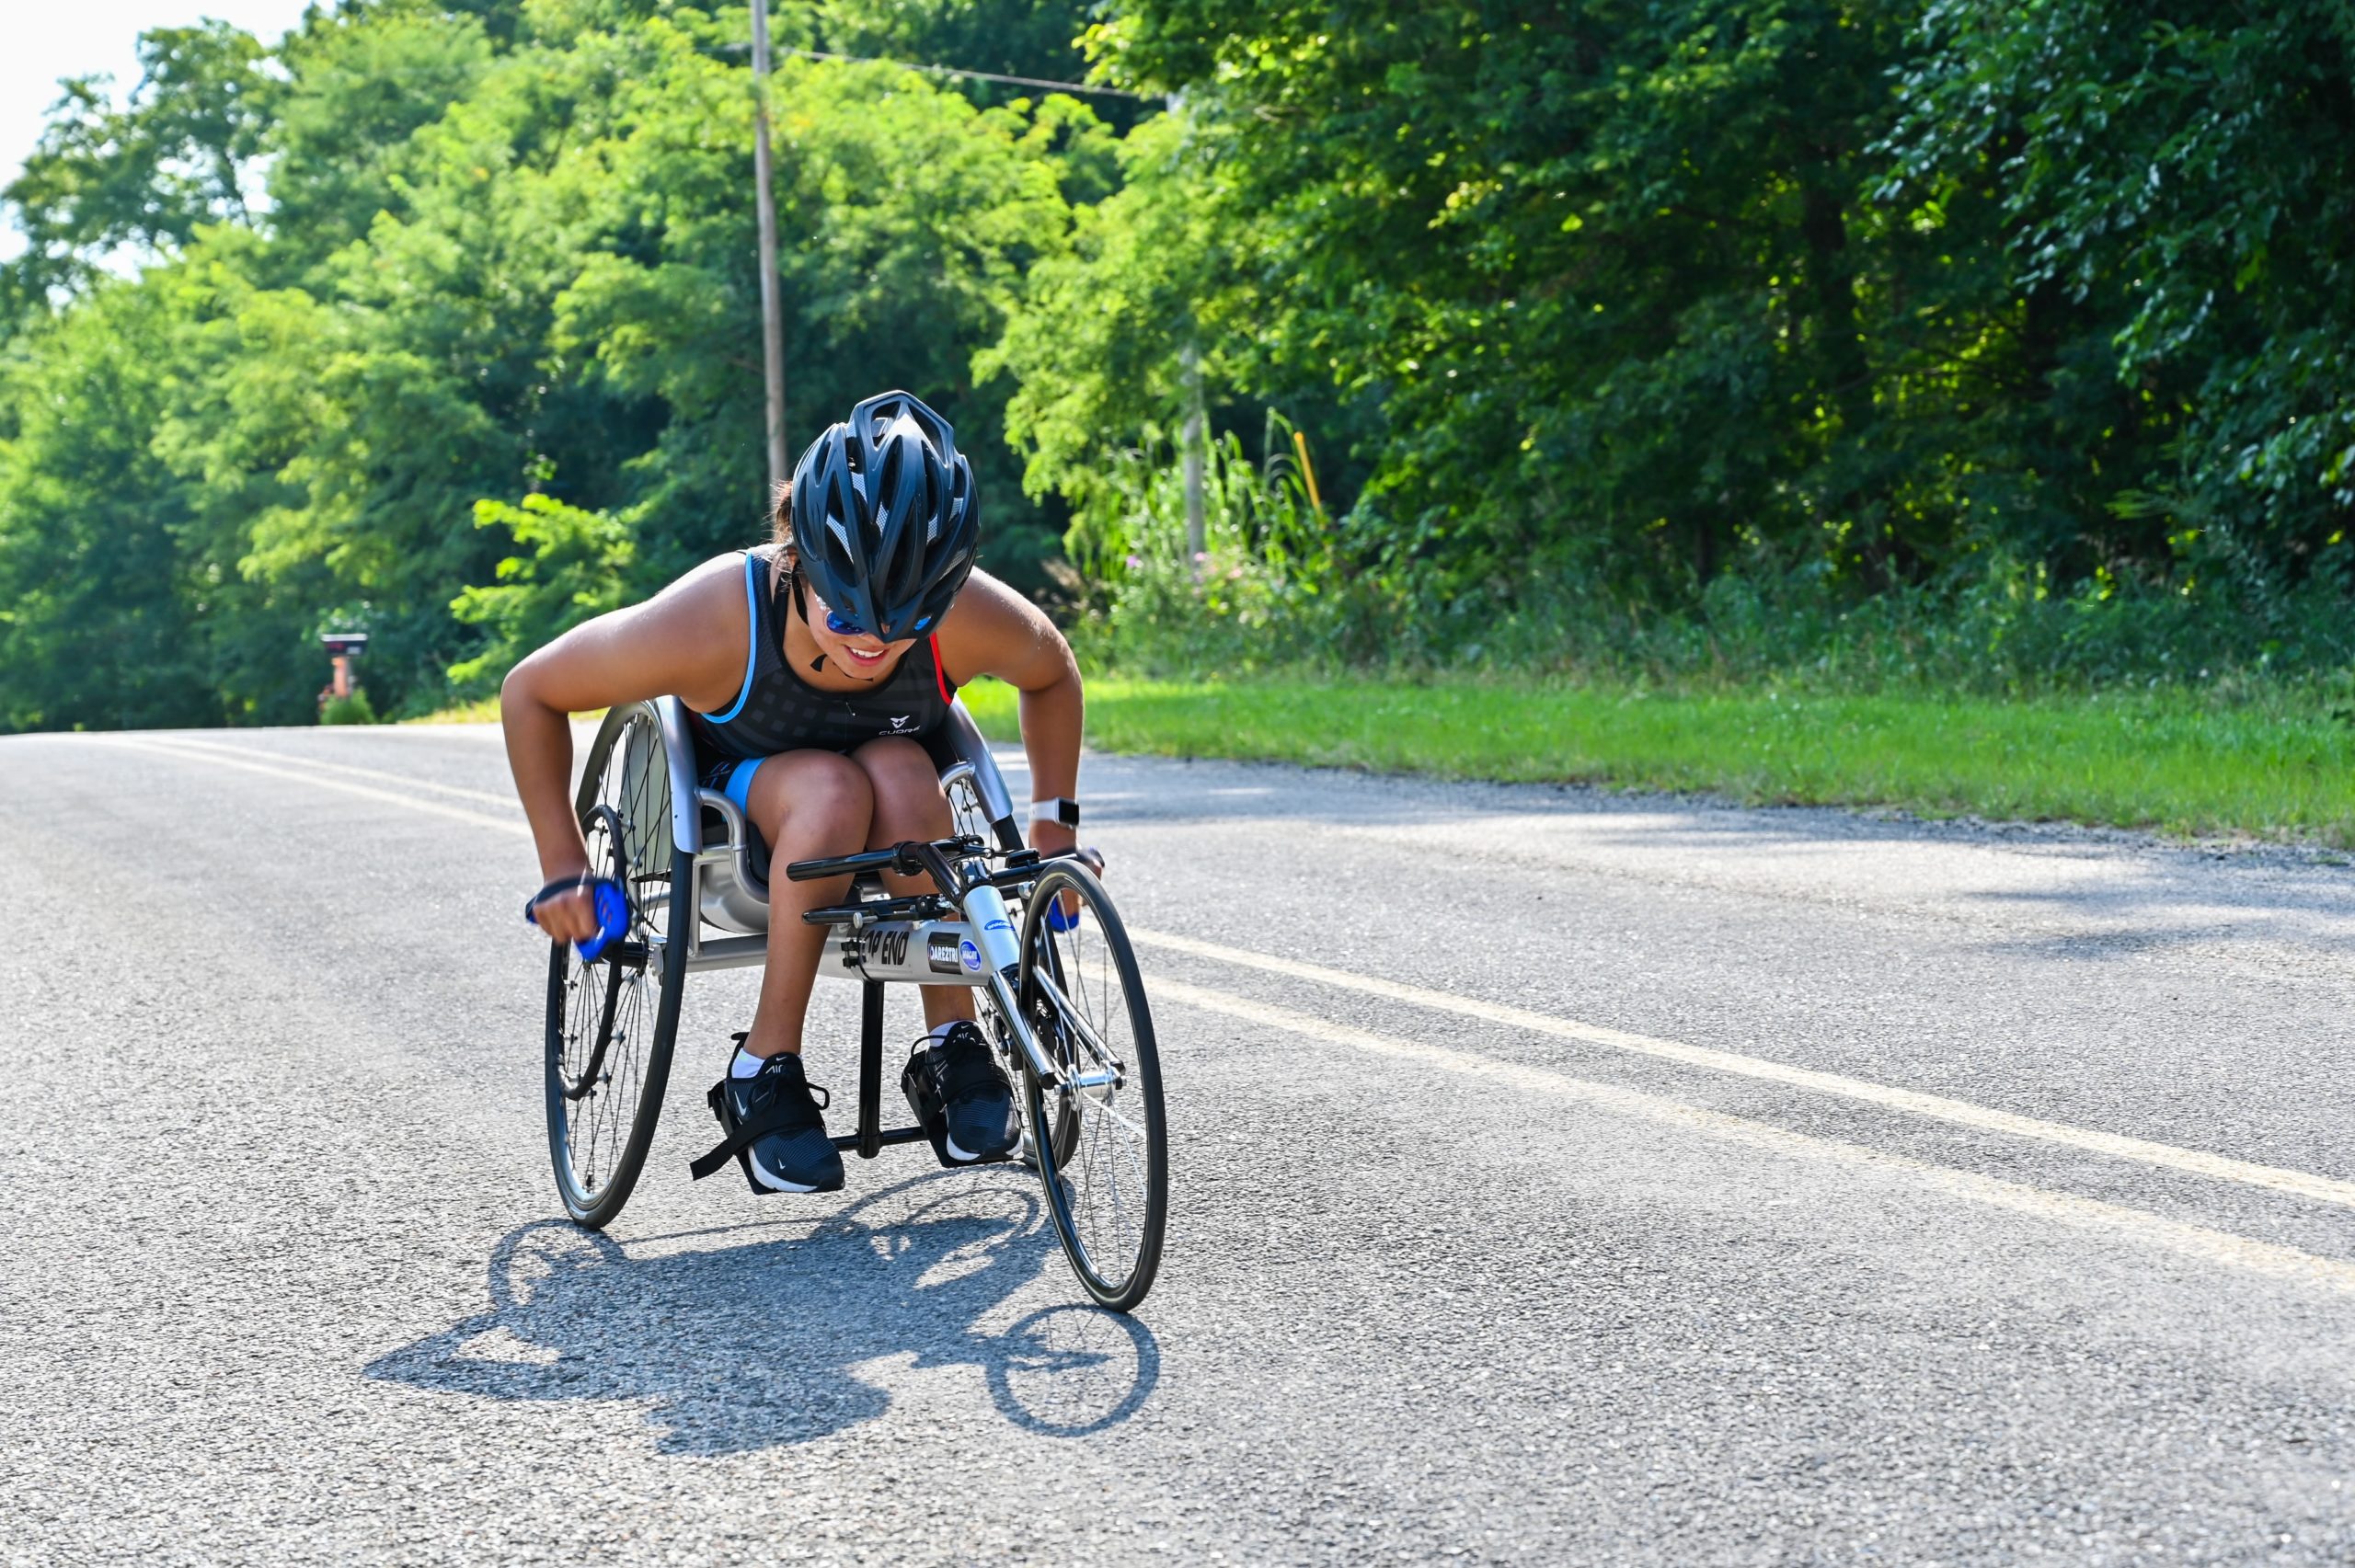 Athlete on road using a racing wheelchair